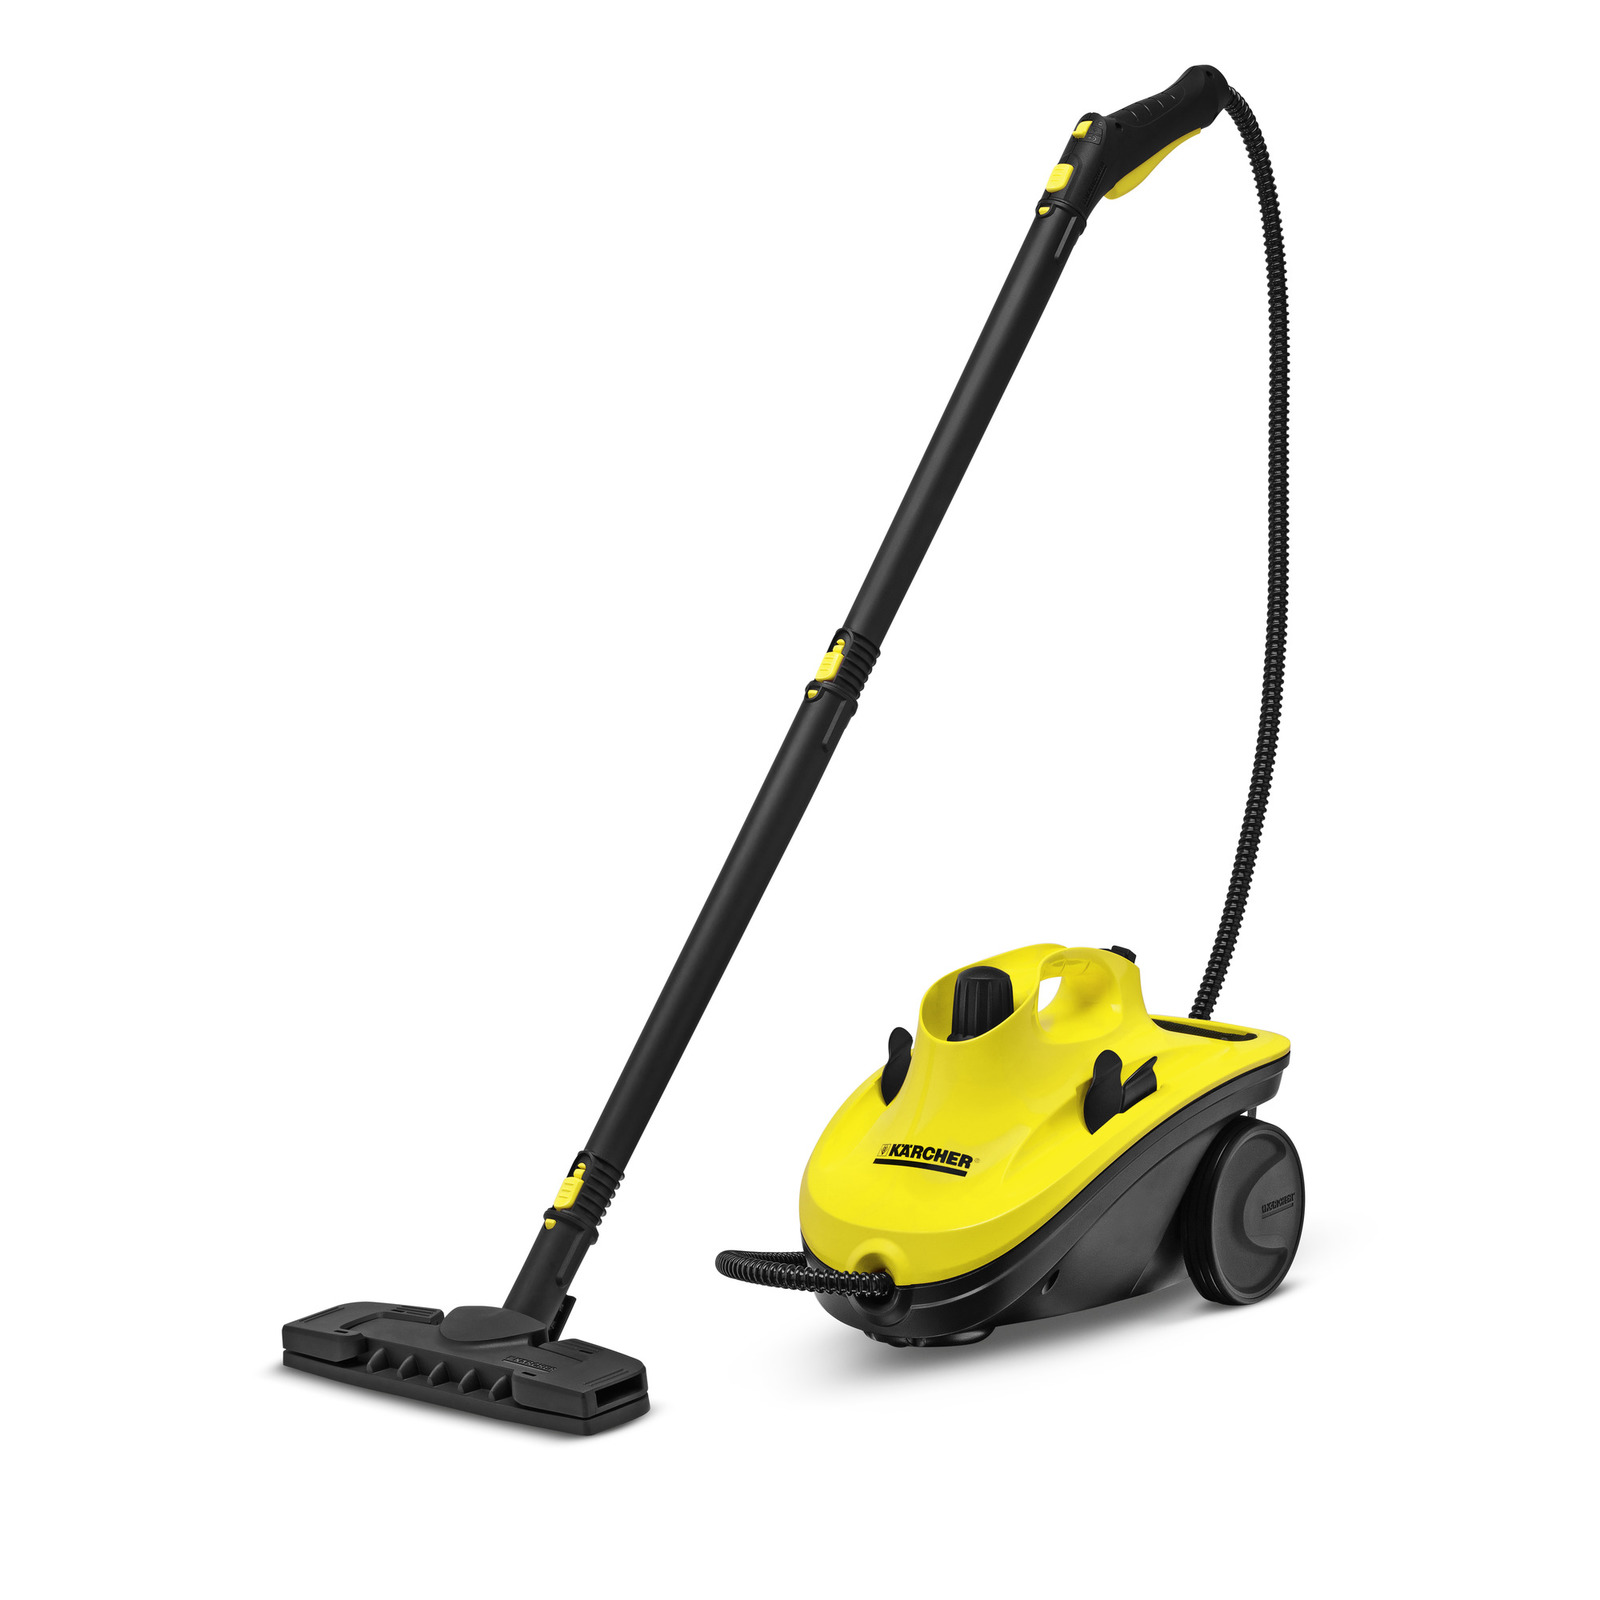 Hadden and Company Ltd. - The Kärcher SC2 Steam Cleaner for the Home Owner  ! In stock now for $1,595 VI ! Watch it on our  link:   - Made in